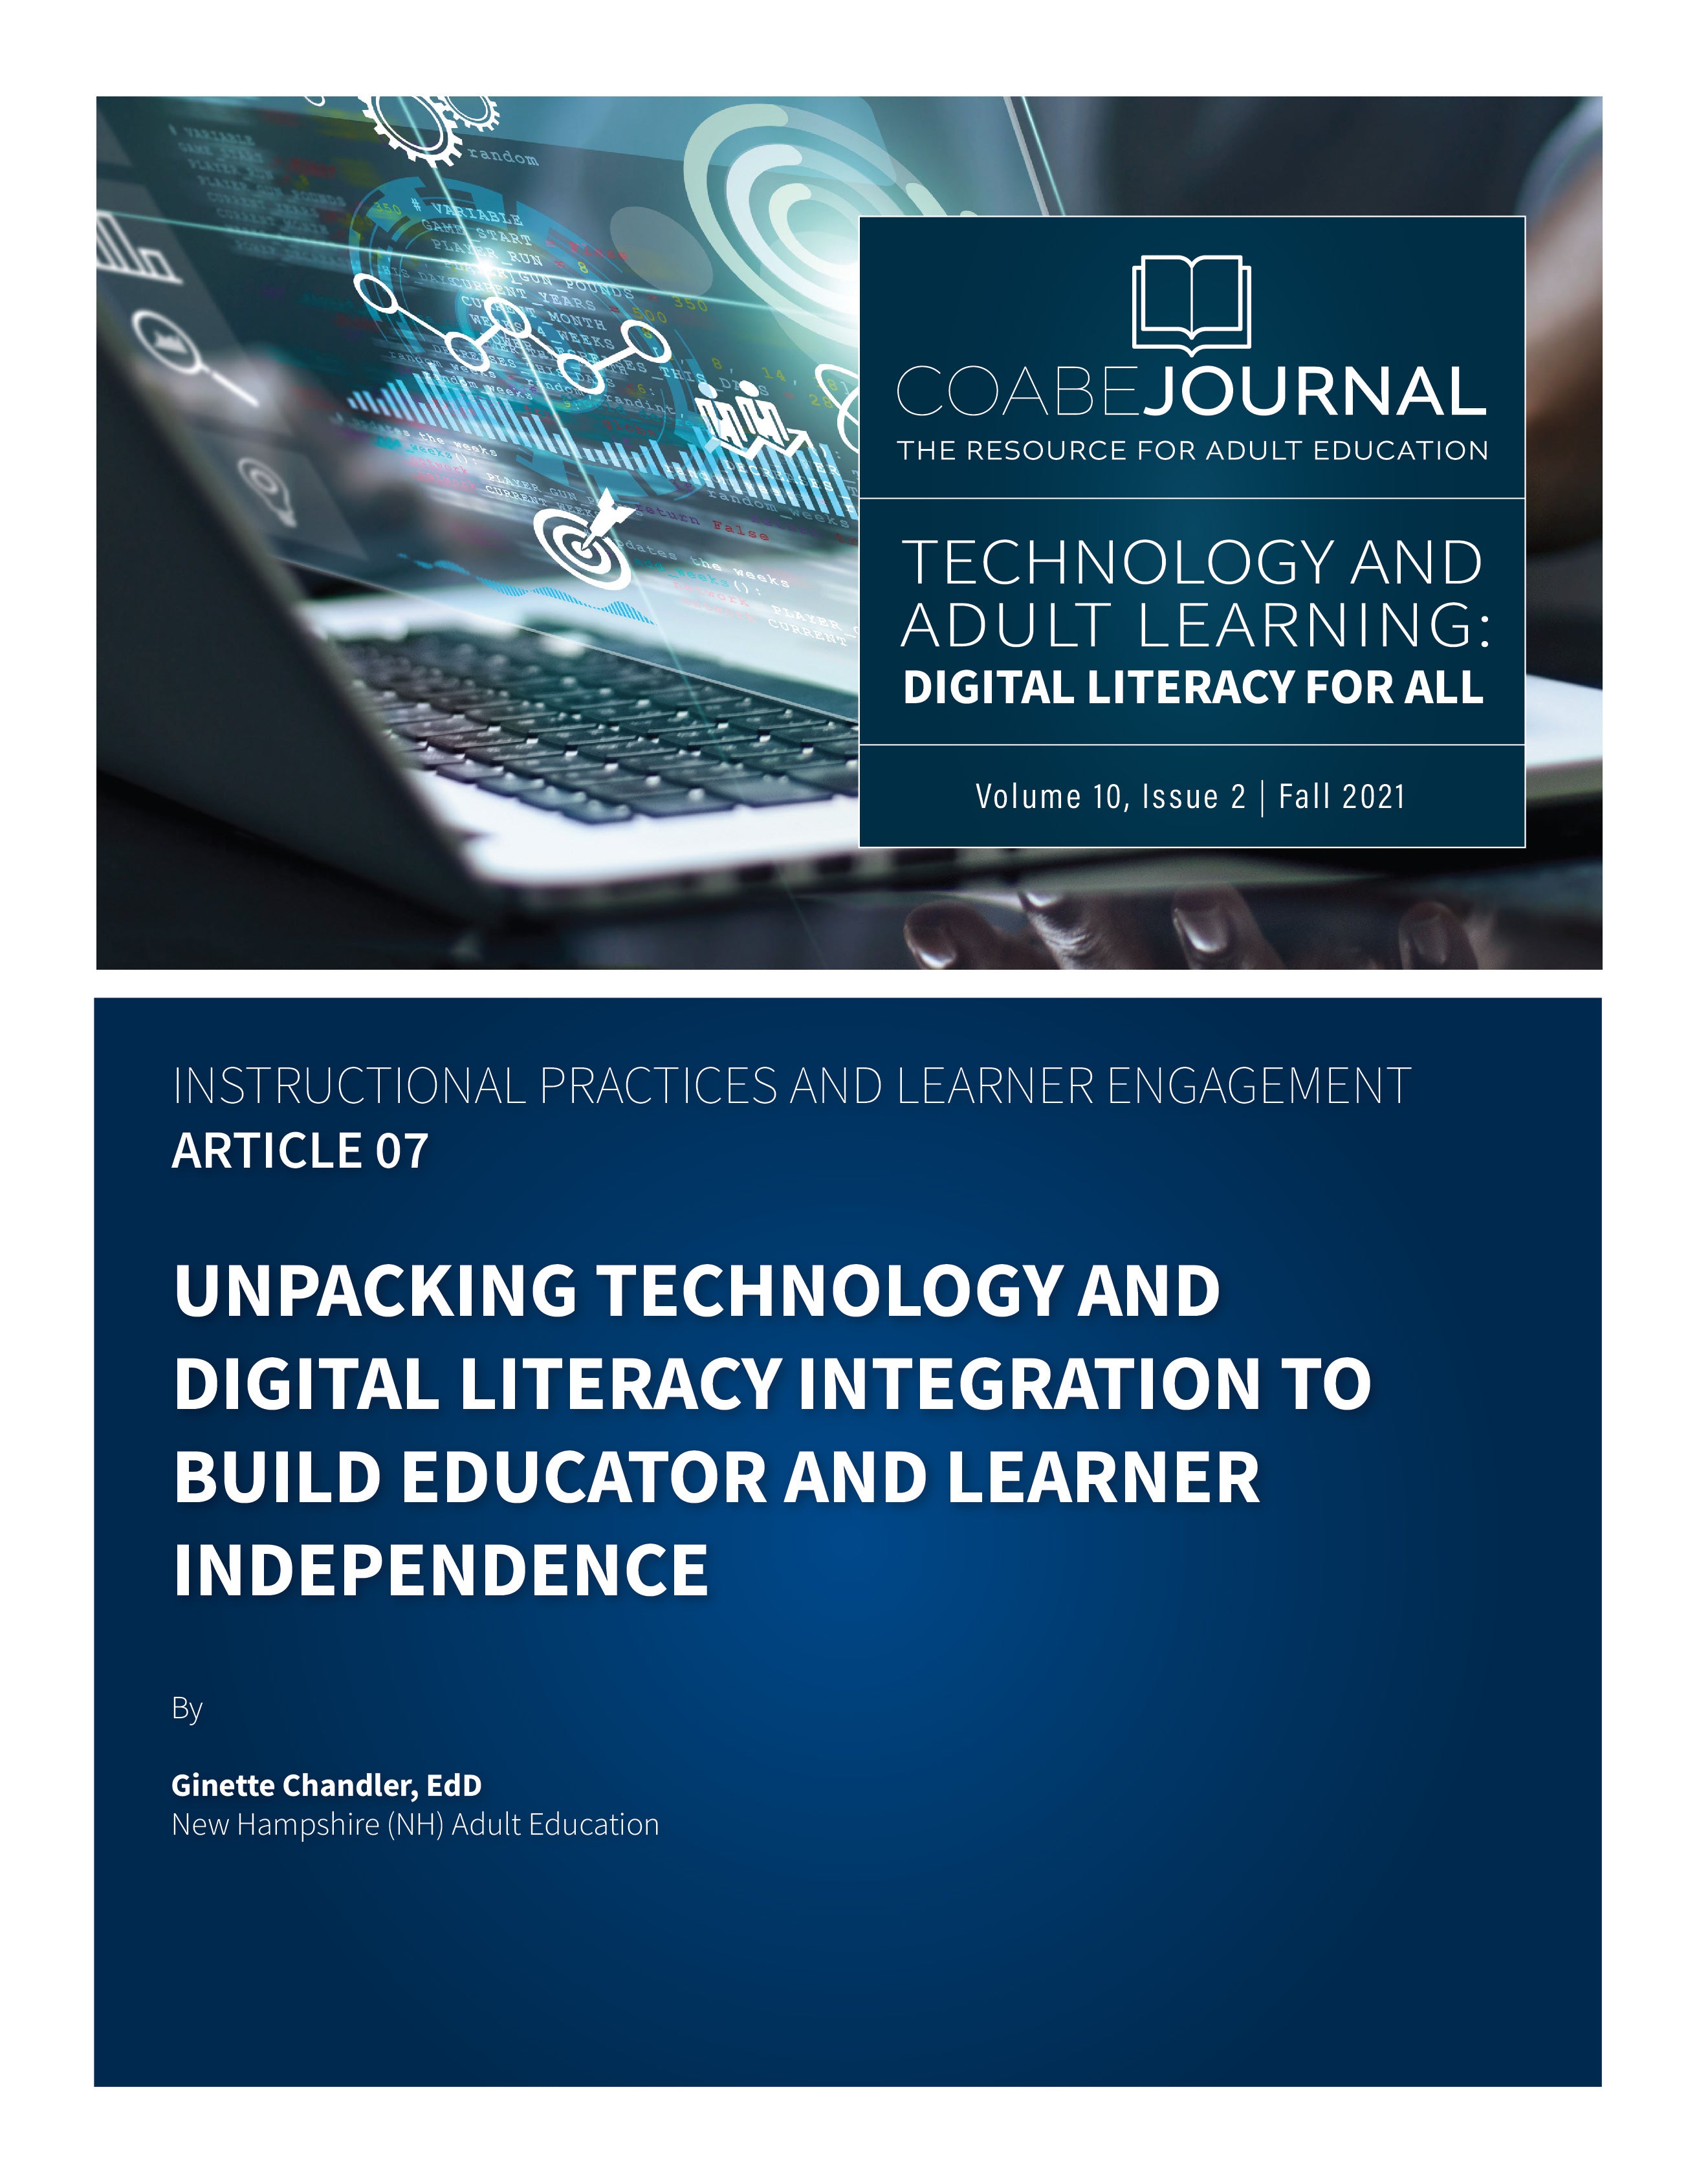 Article 07 | Unpacking Technology And Digital Literacy Integration To Build Educator And Learner Independence